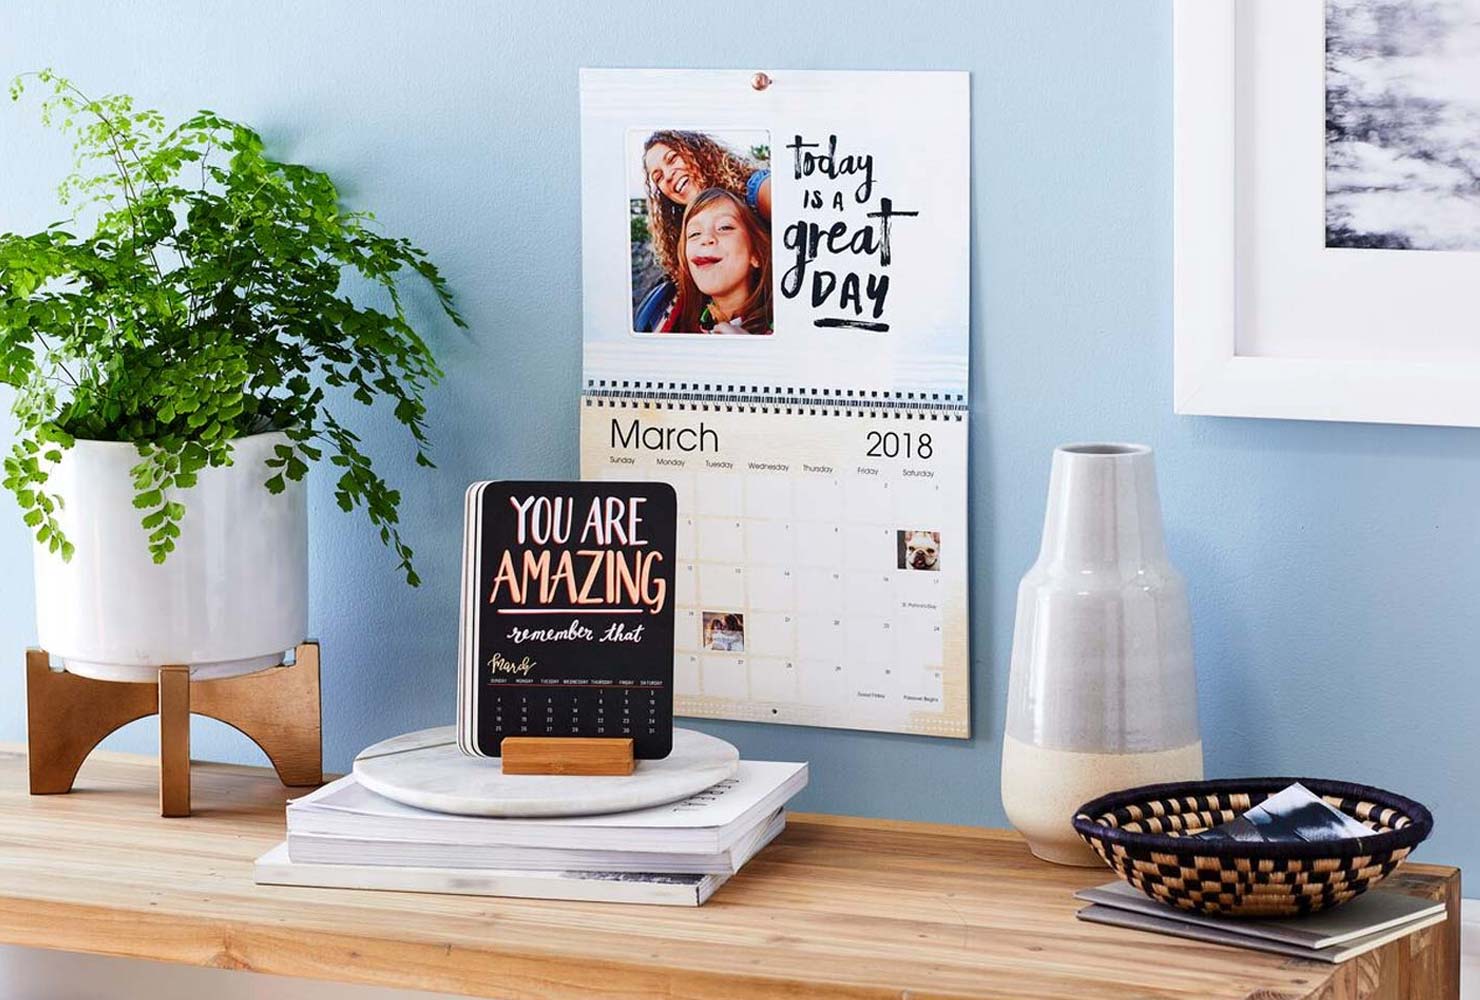 Motivational calendars in a bright office.